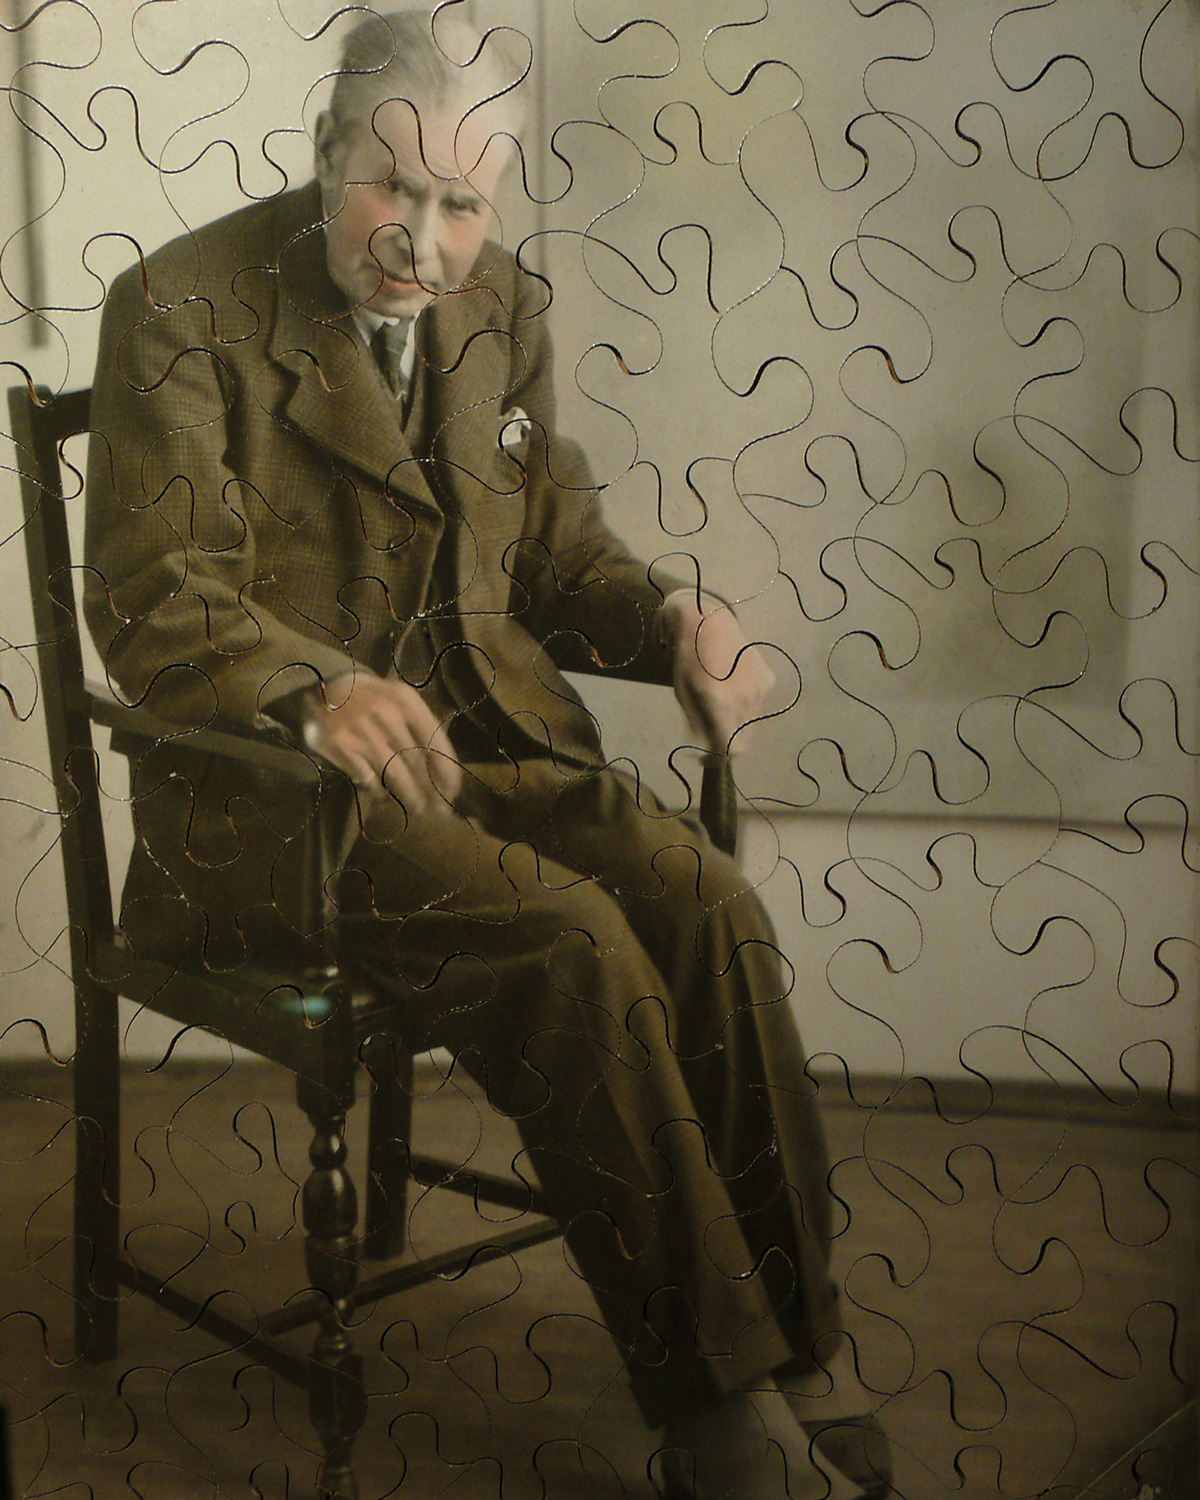 Jigsaw puzzle depicting David Devant about the time of his forced
resignation from The Magic Circle in 1936. Courtesy The Magic Circle
Museum Collection.